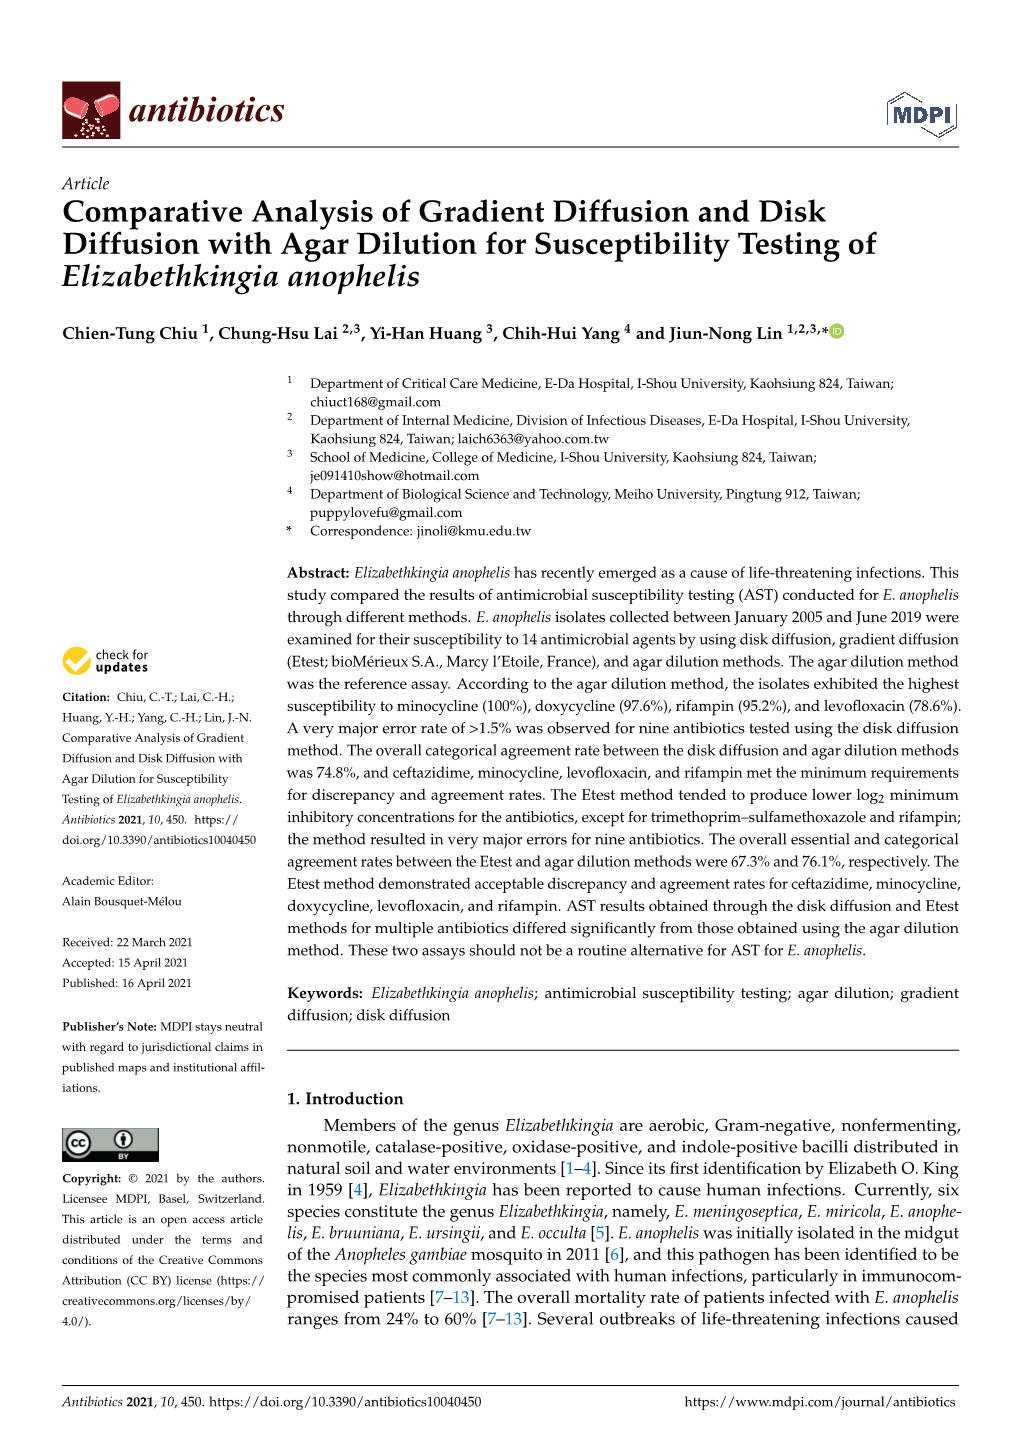 Comparative Analysis of Gradient Diffusion and Disk Diffusion with Agar Dilution for Susceptibility Testing of Elizabethkingia Anophelis